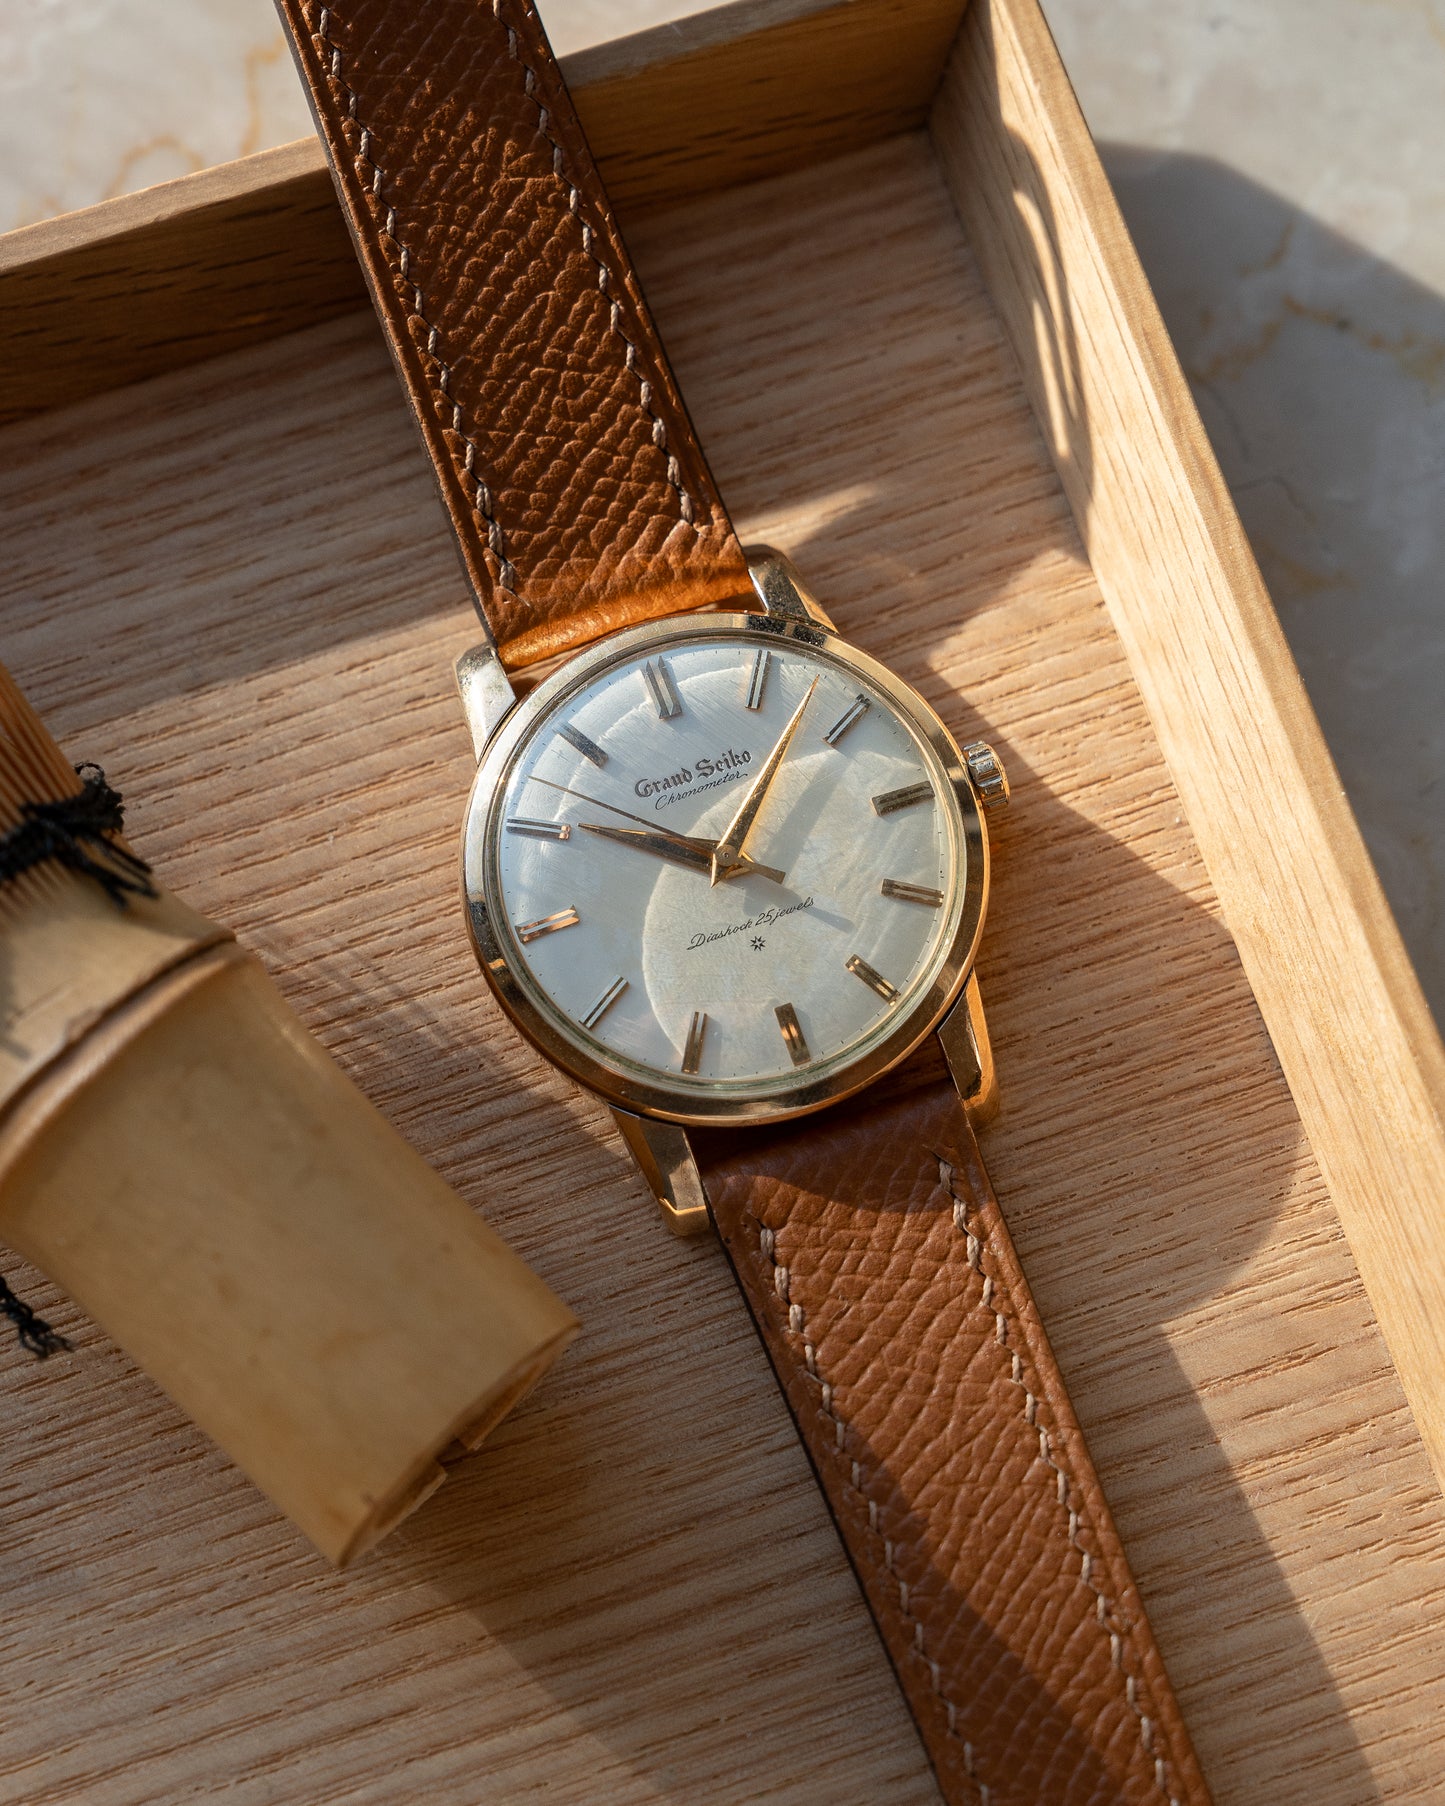 Grand Seiko First carved dial, April 1961, transitional "special dial"